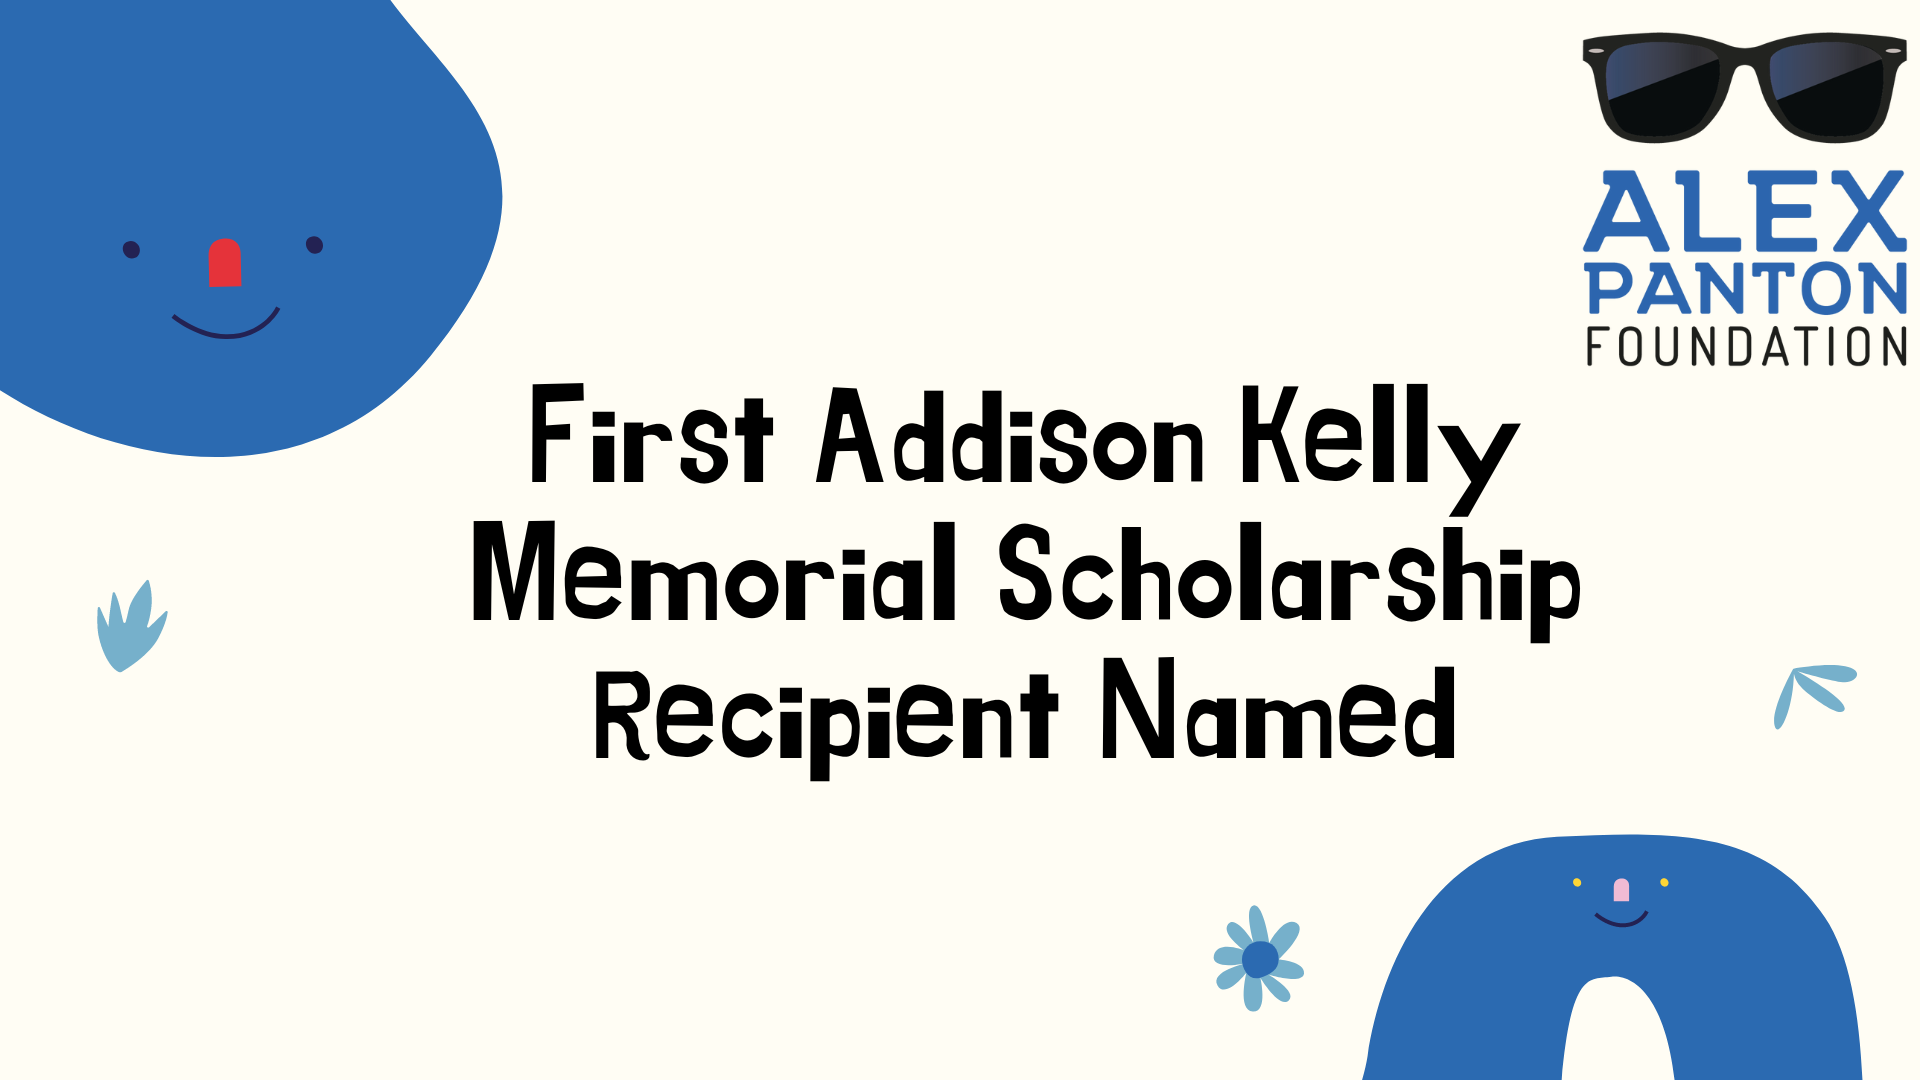 First Addison Kelly Memorial Scholarship Recipient Named